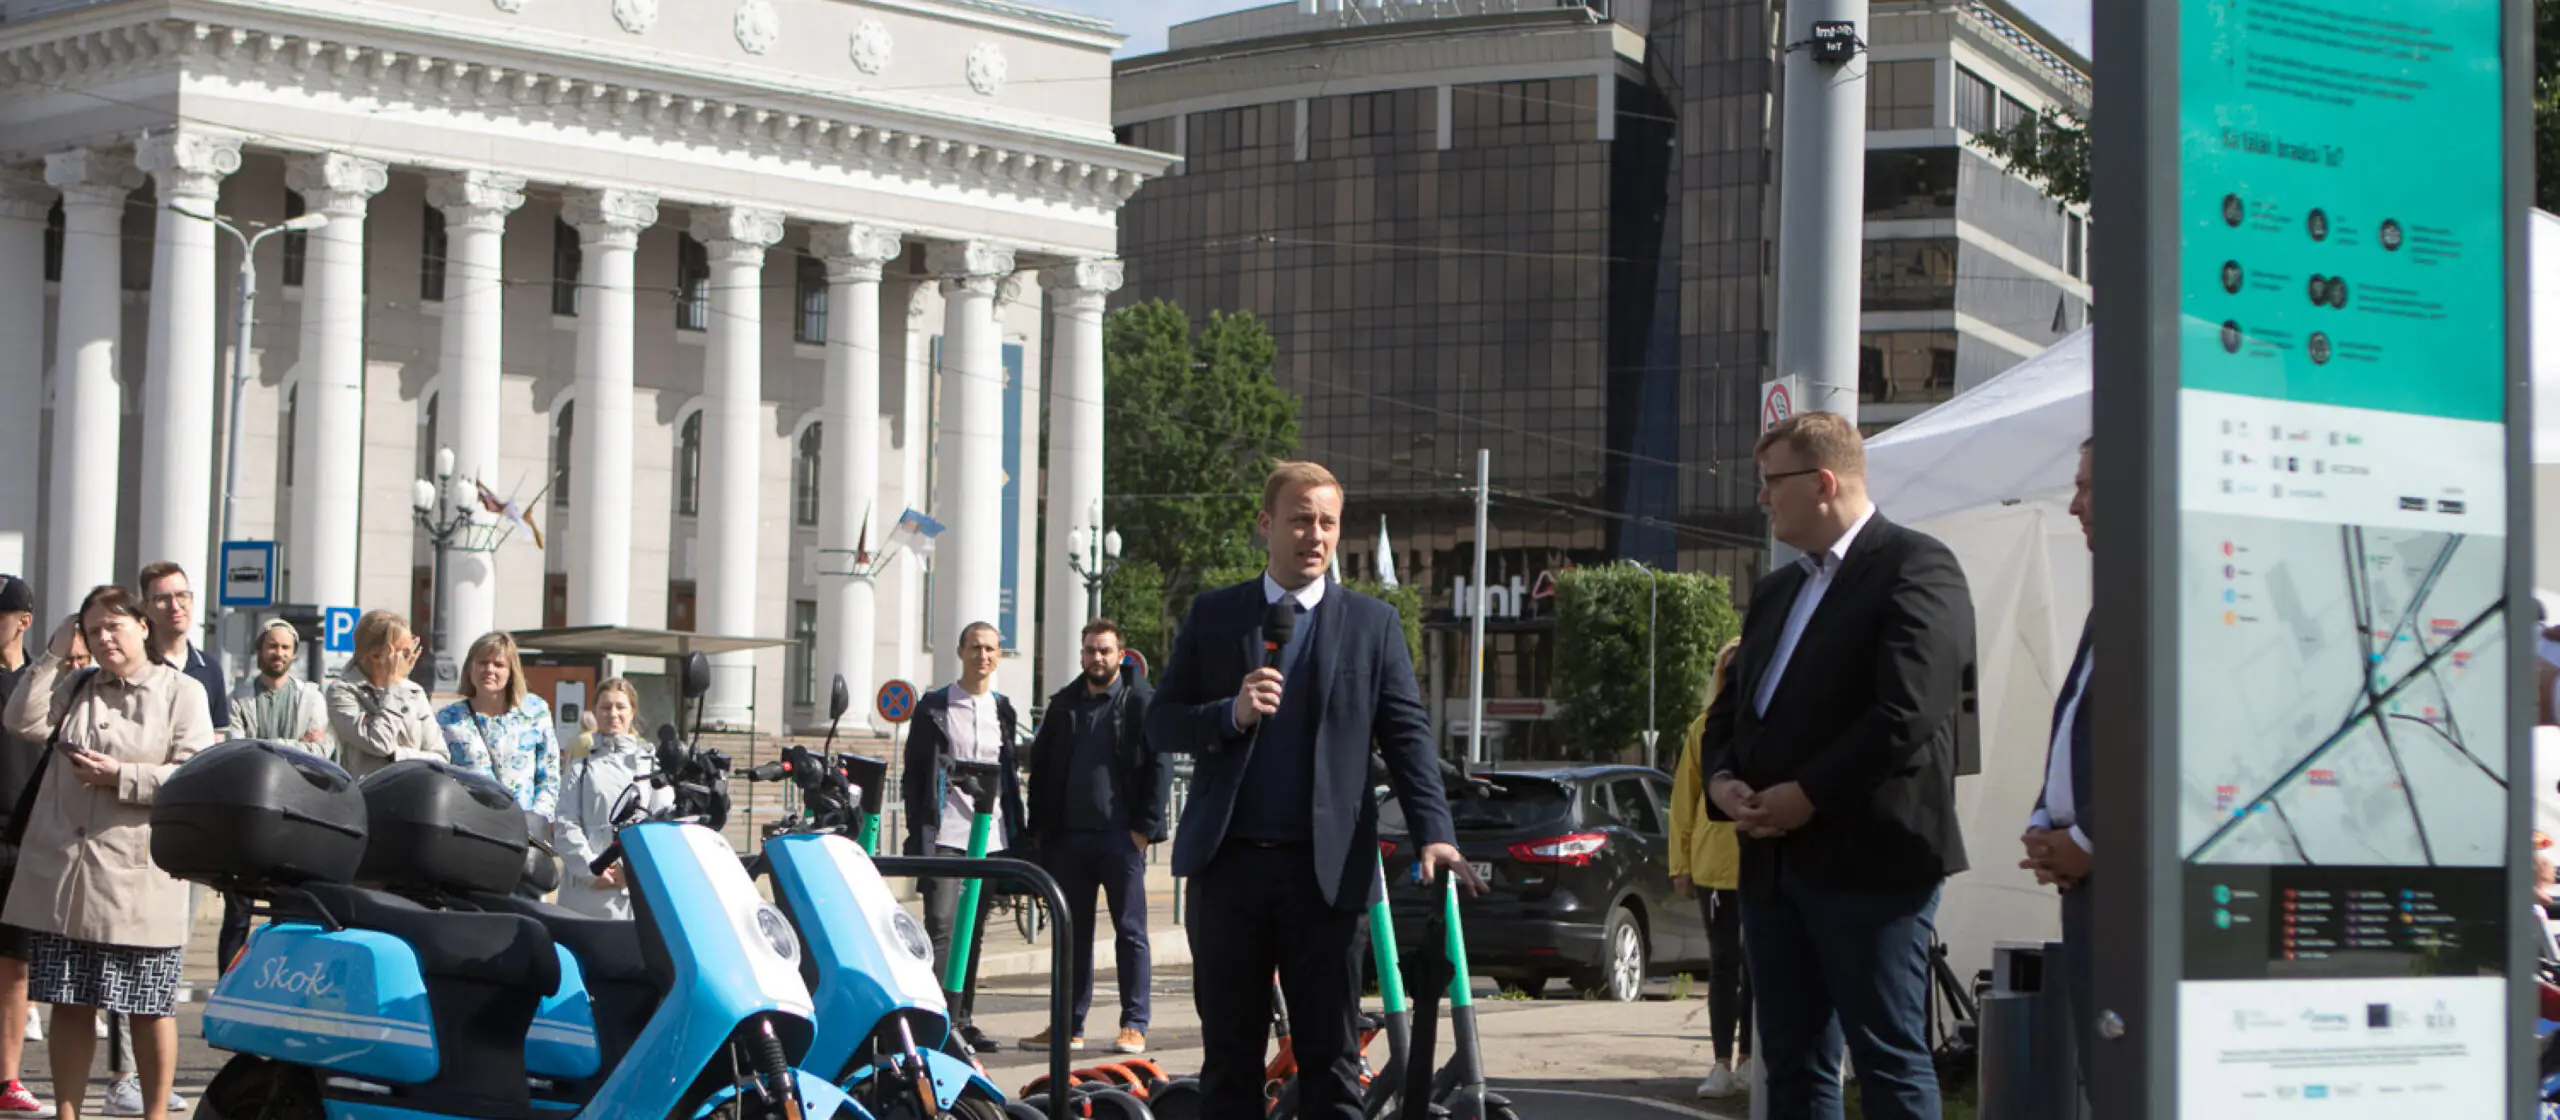 Trains and Bicycles: a Sustainable Transport Strategy of Riga